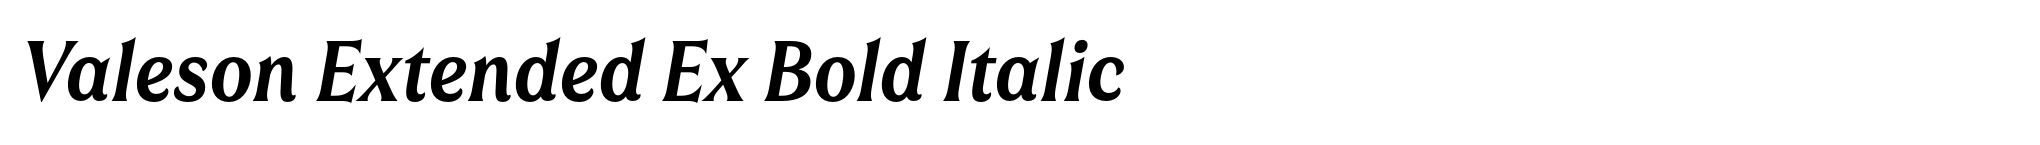 Valeson Extended Ex Bold Italic image